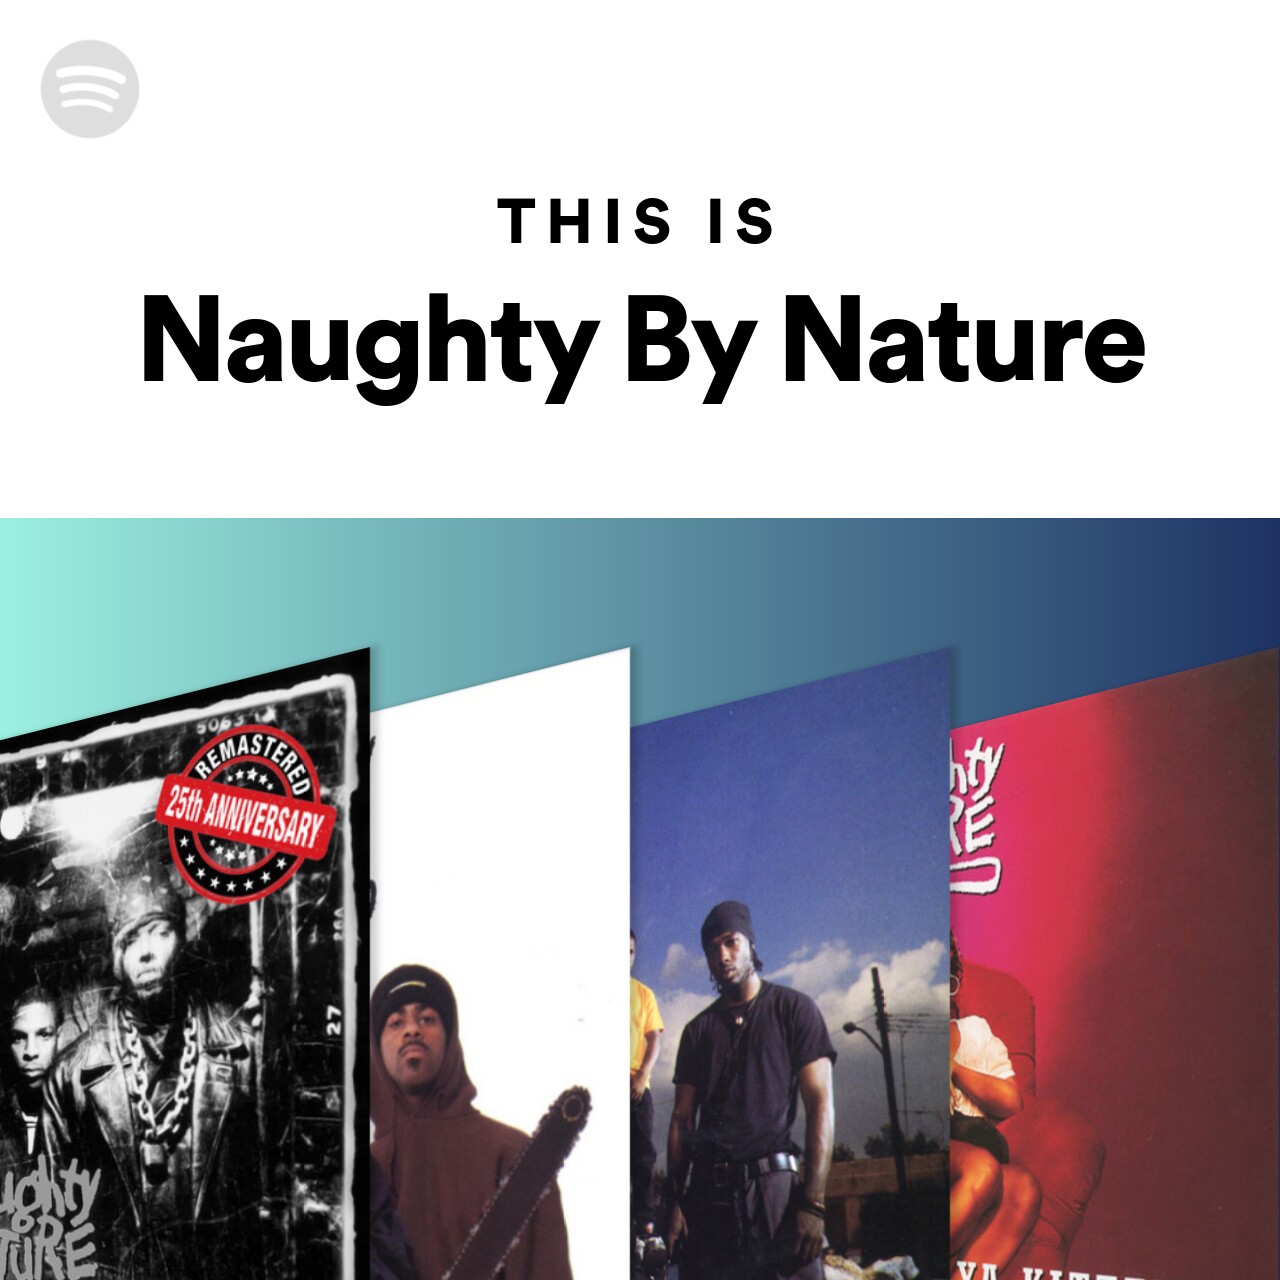 This Is Naughty By Nature by spotify Spotify Playlist